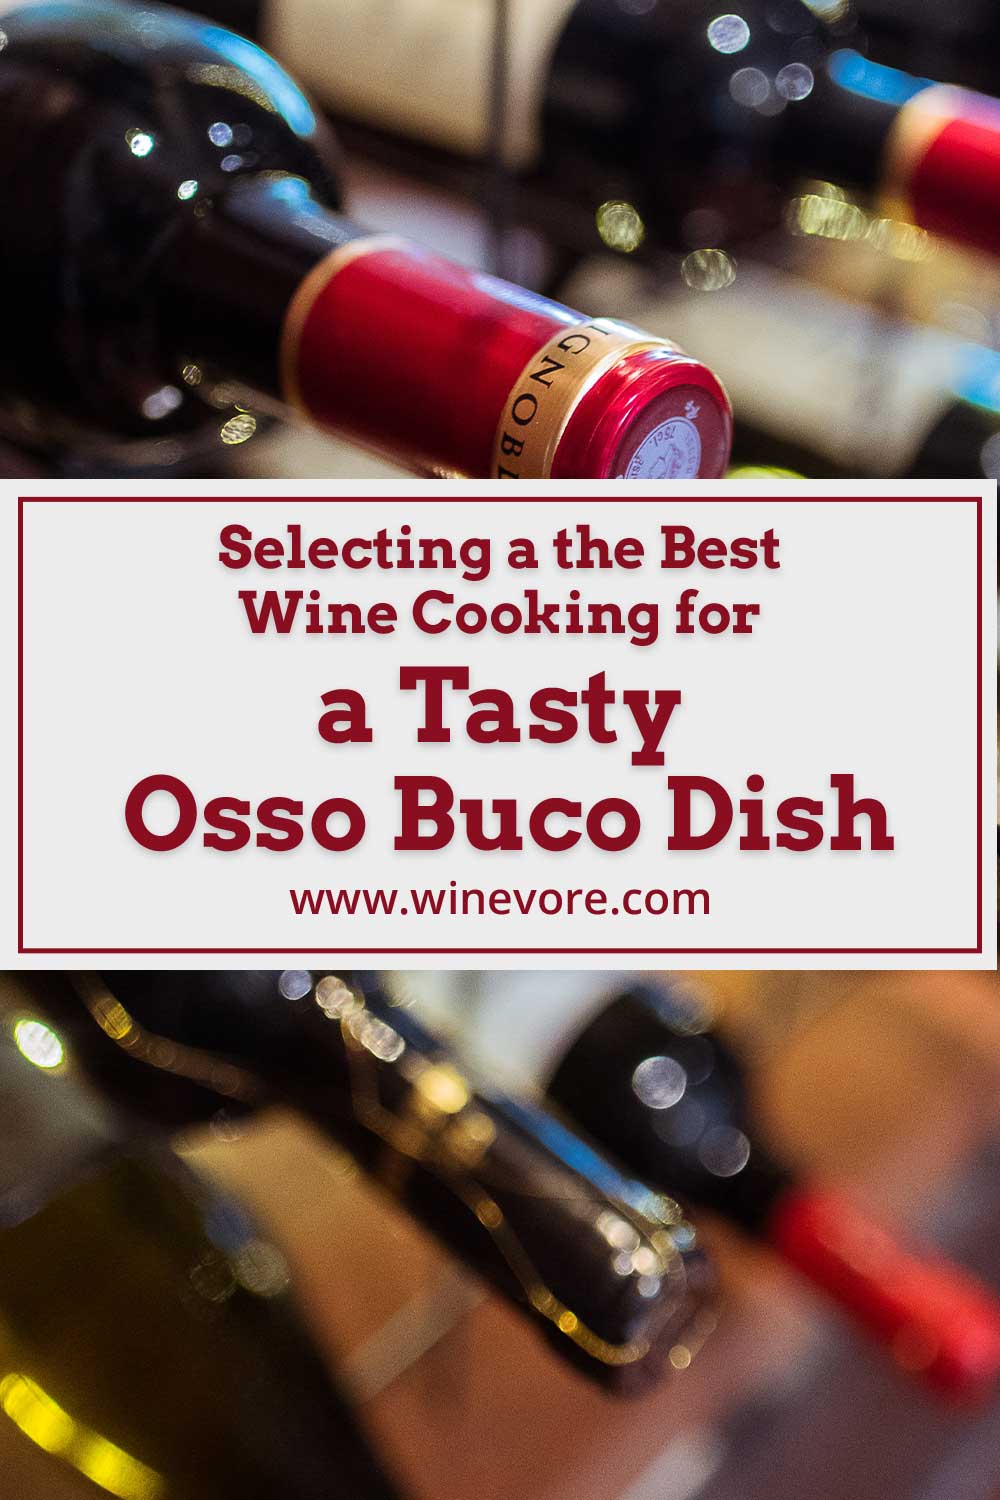 A few sealed wine bottles stacked - Best Wine Cooking for a Tasty Osso Buco Dish.